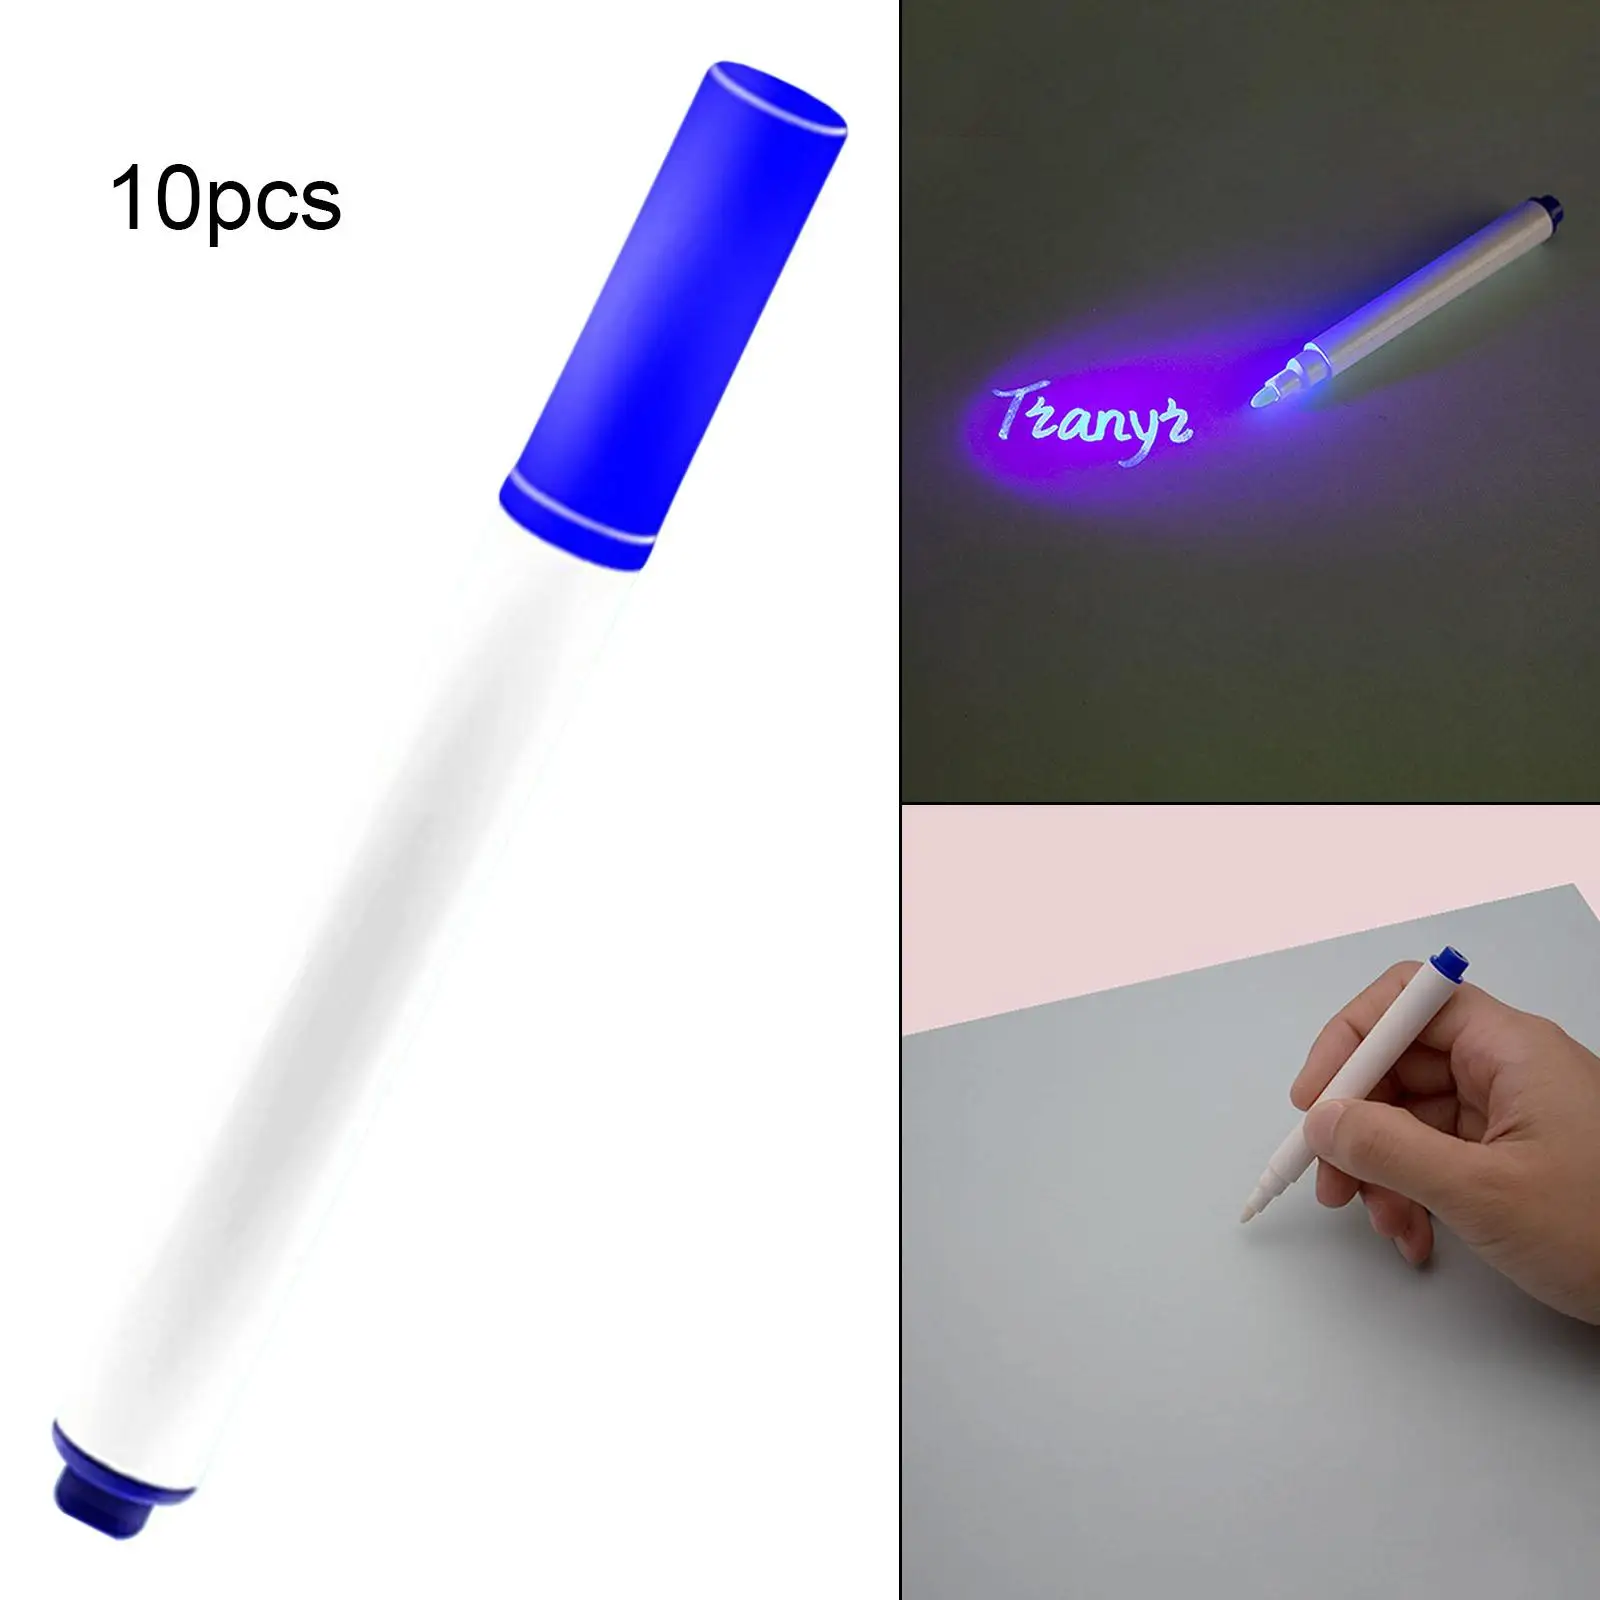 10Pcs Invisible Ink Pen Marker Pens 0.5cm Round Tip Painting Drawing Writing for Birthday Notes Doodle Graffiti Message